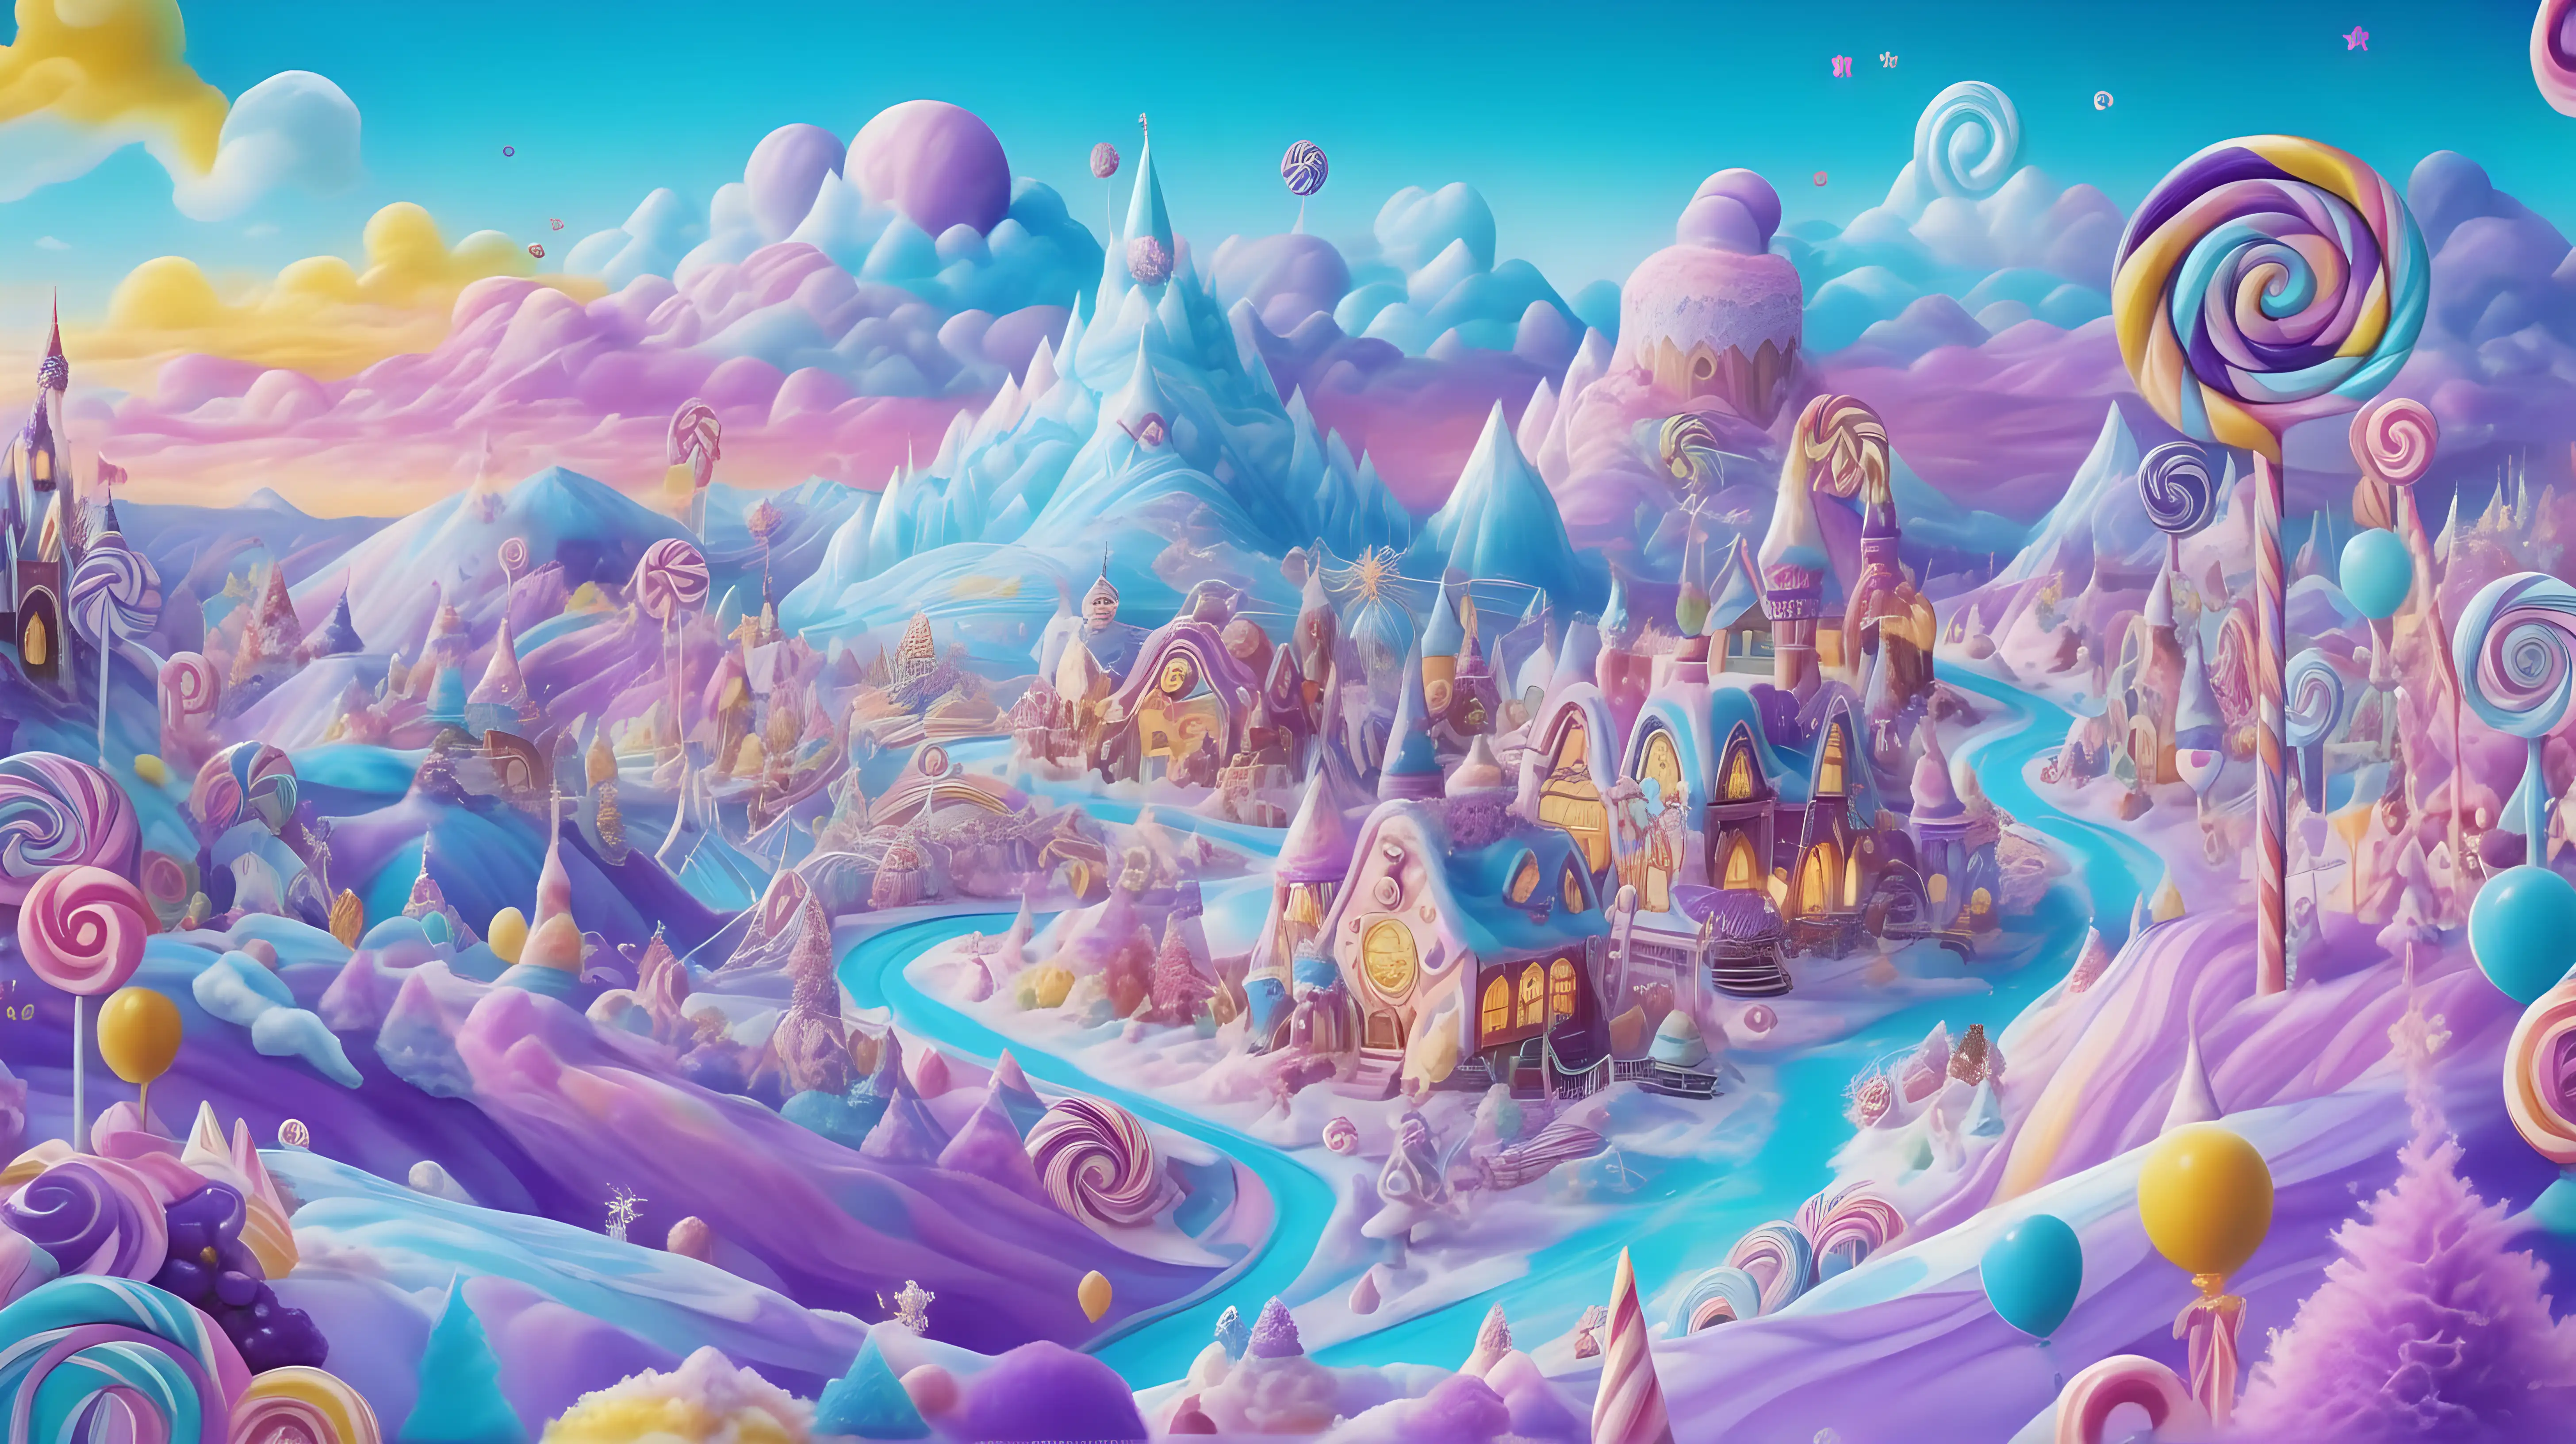 Fairytale, whimsical candy wonderland. Lollipops by magical bright-turquoise-sugar rivers surrounded by candy and whip cream and ice cream. Candy in the middle of ice cream-frosting hills. Candy-sprinkles. Purple. Blue. 8K. bright-yellow, and purple sky with cotton-candy clouds.